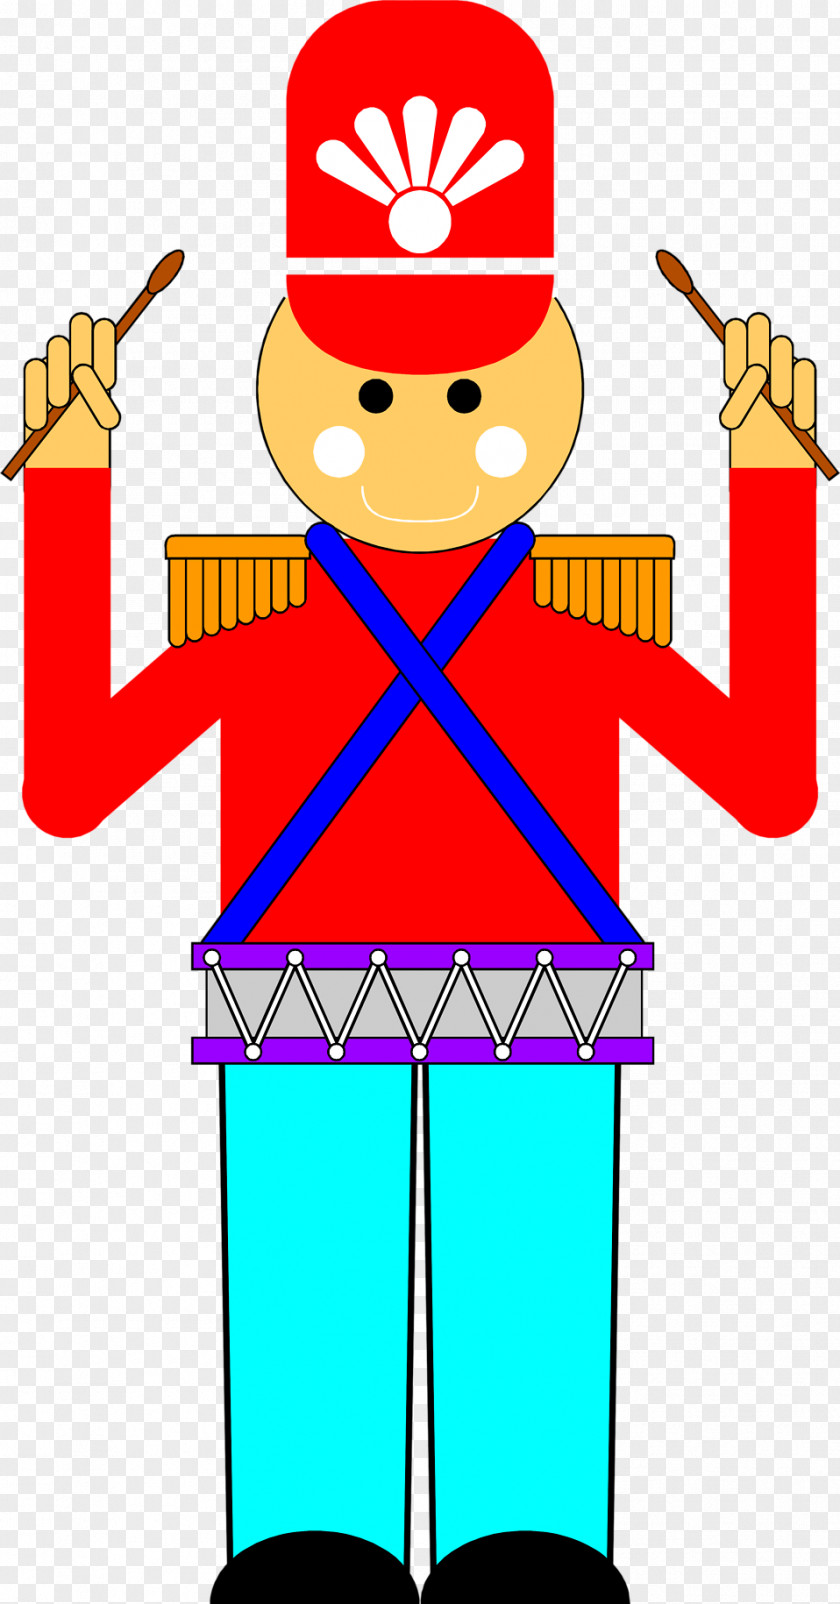 Soldier Toy Nutcracker Doll Clip Art PNG